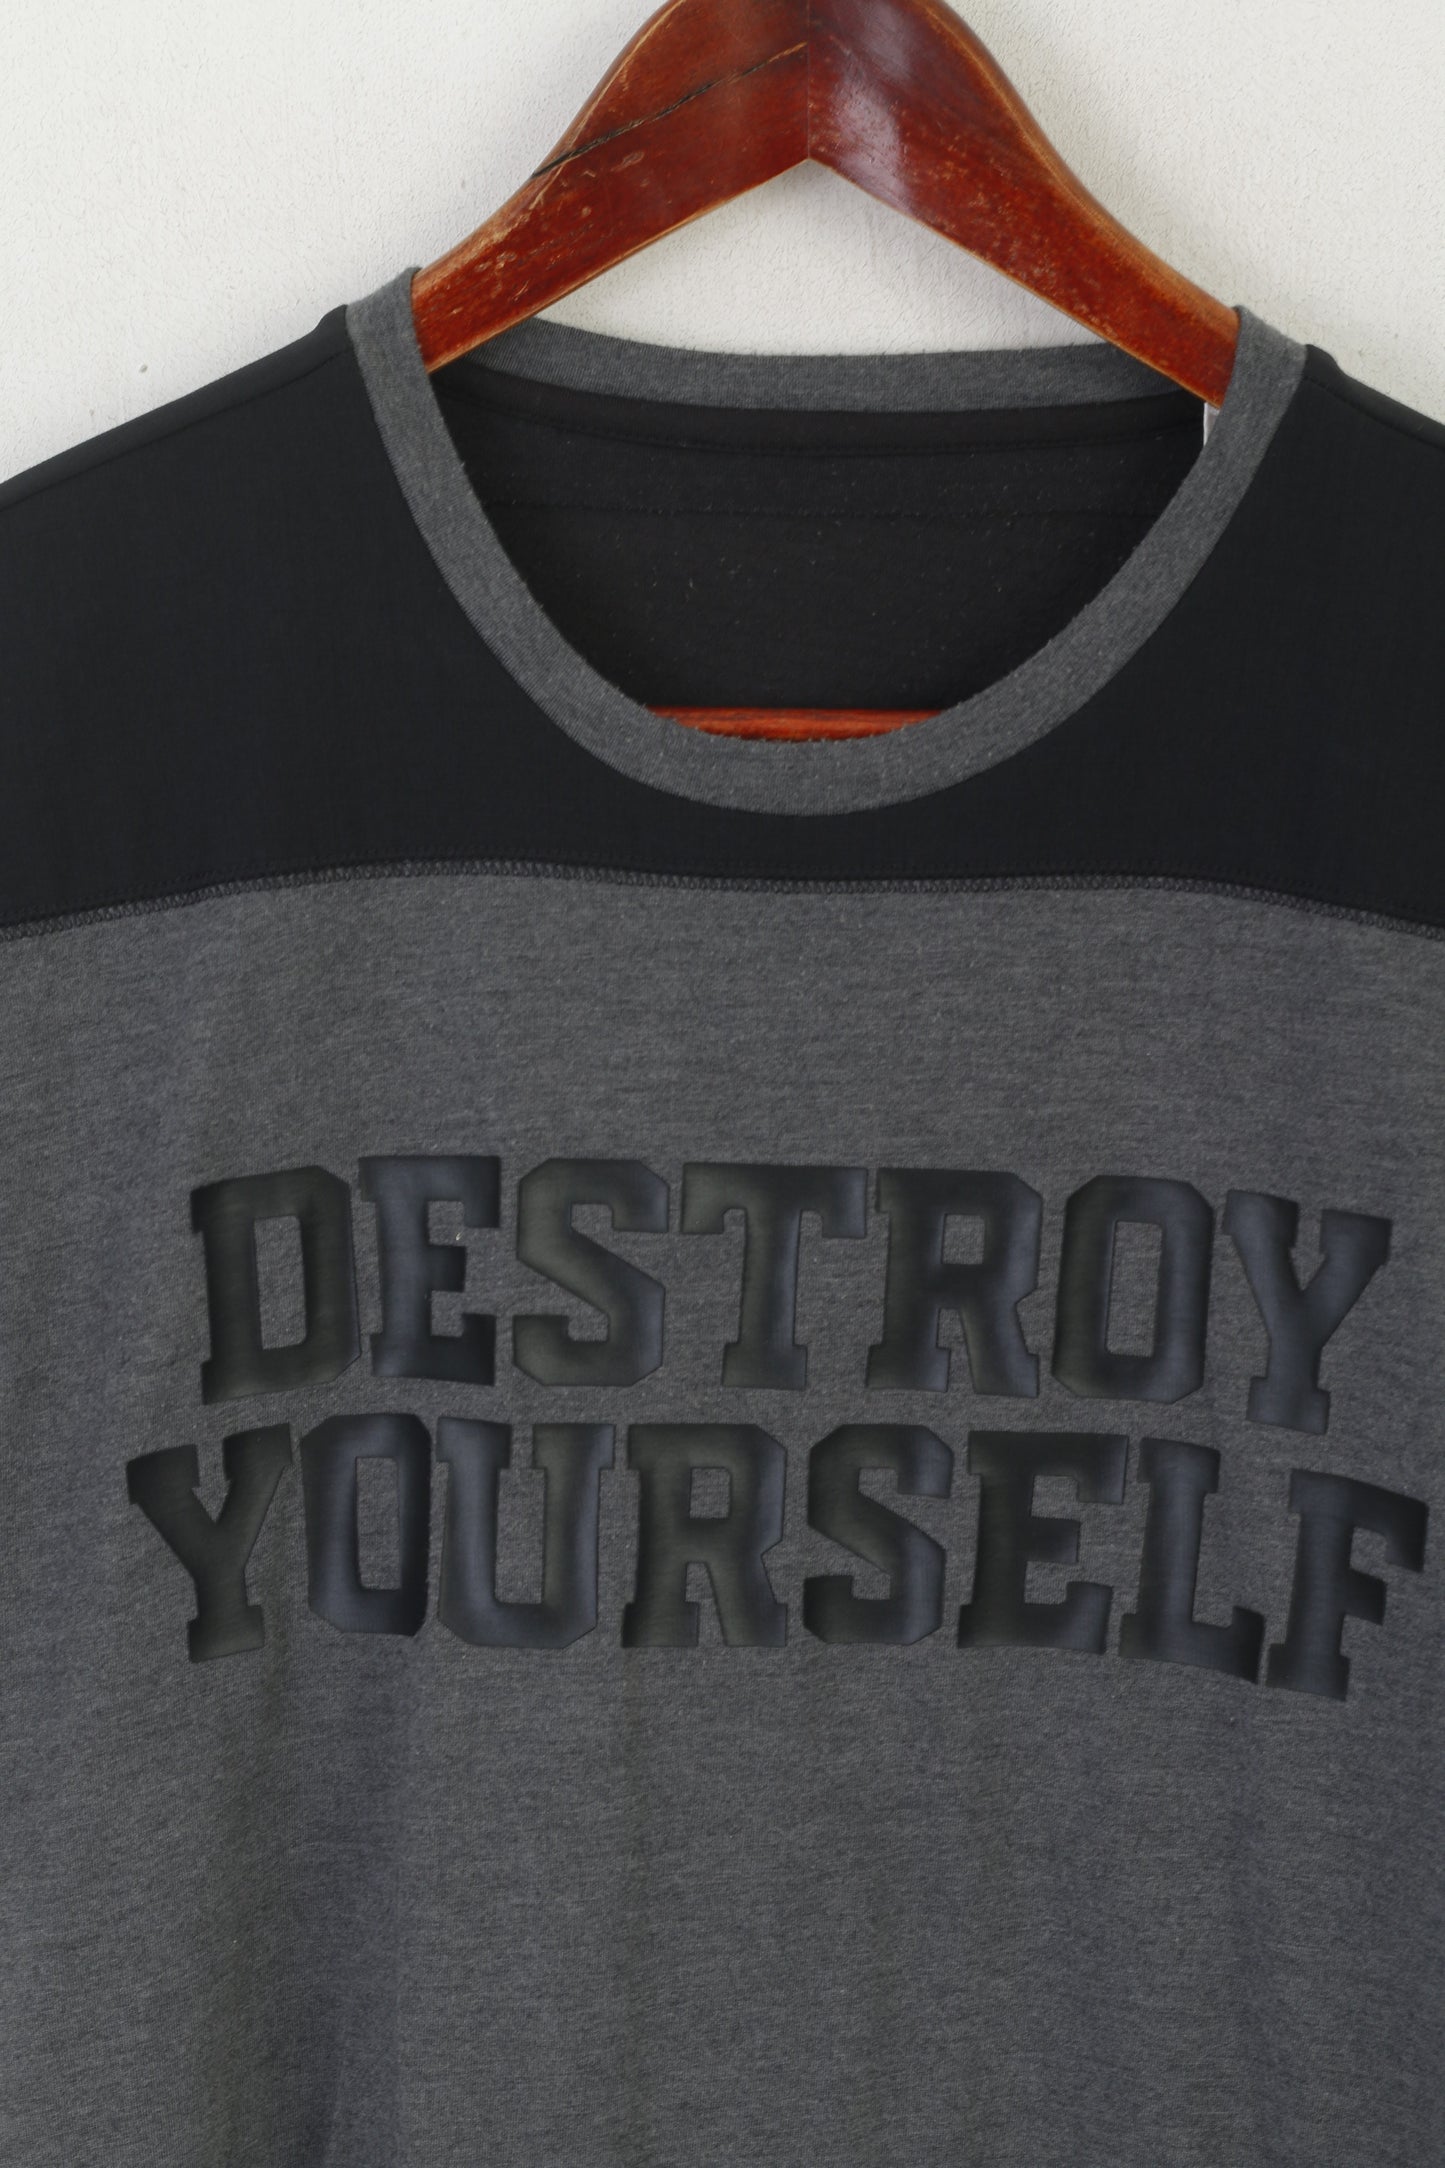 Adidas hommes S chemise gris Destroy Yourself Climacool Sportswear Run Active haut